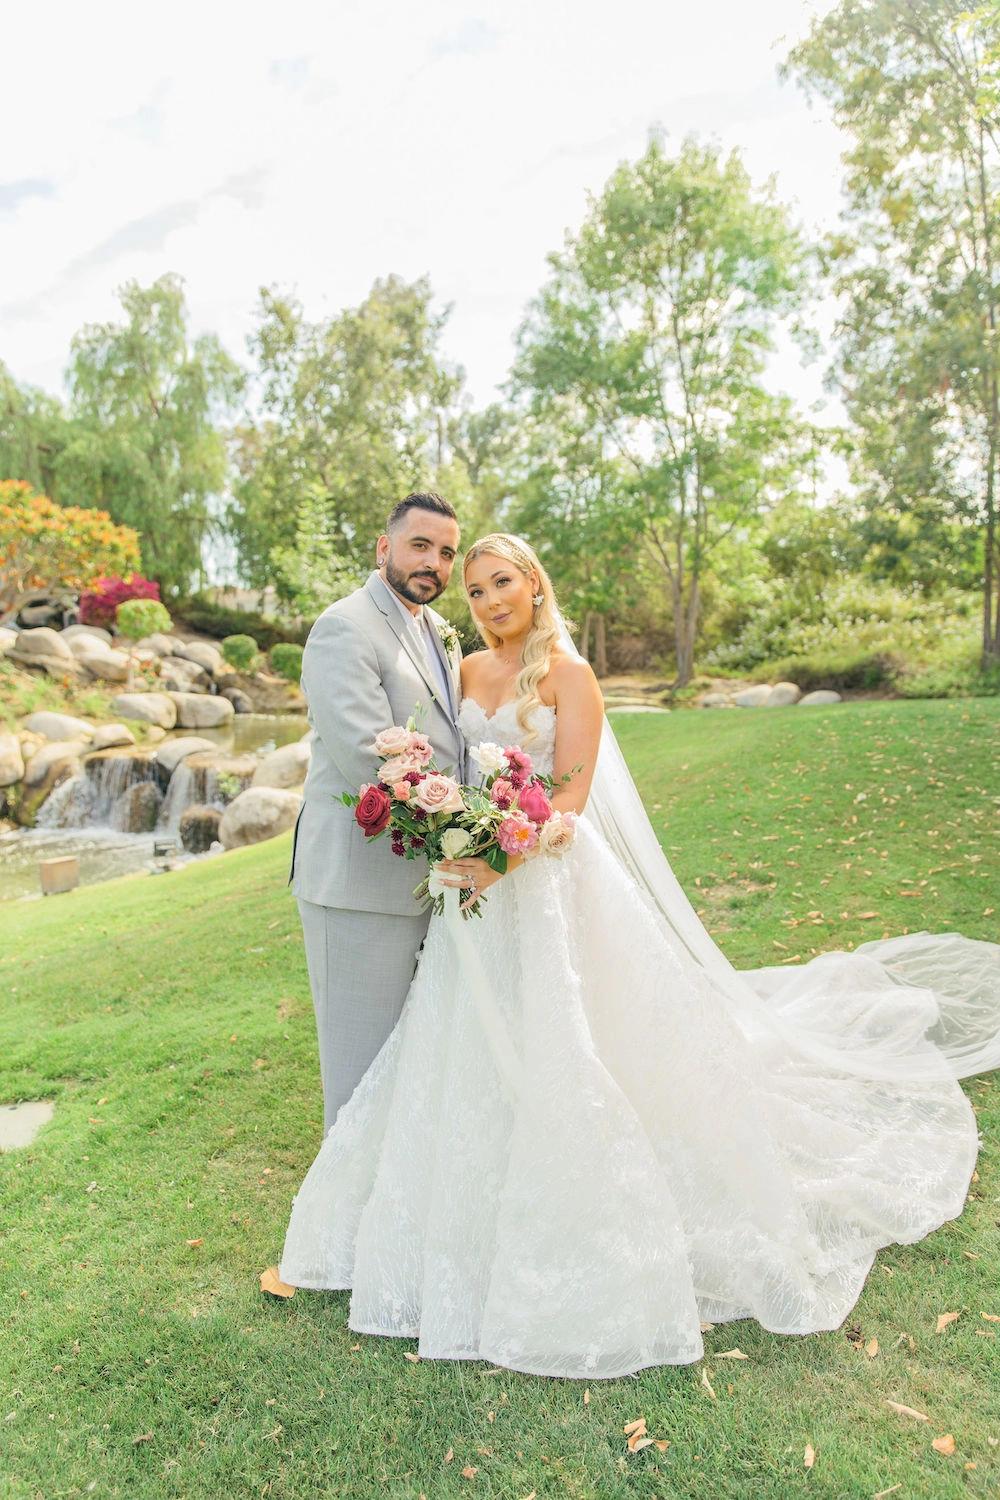 Lauren Marries Paul in Sparkly Strapless Bridal Gown Image